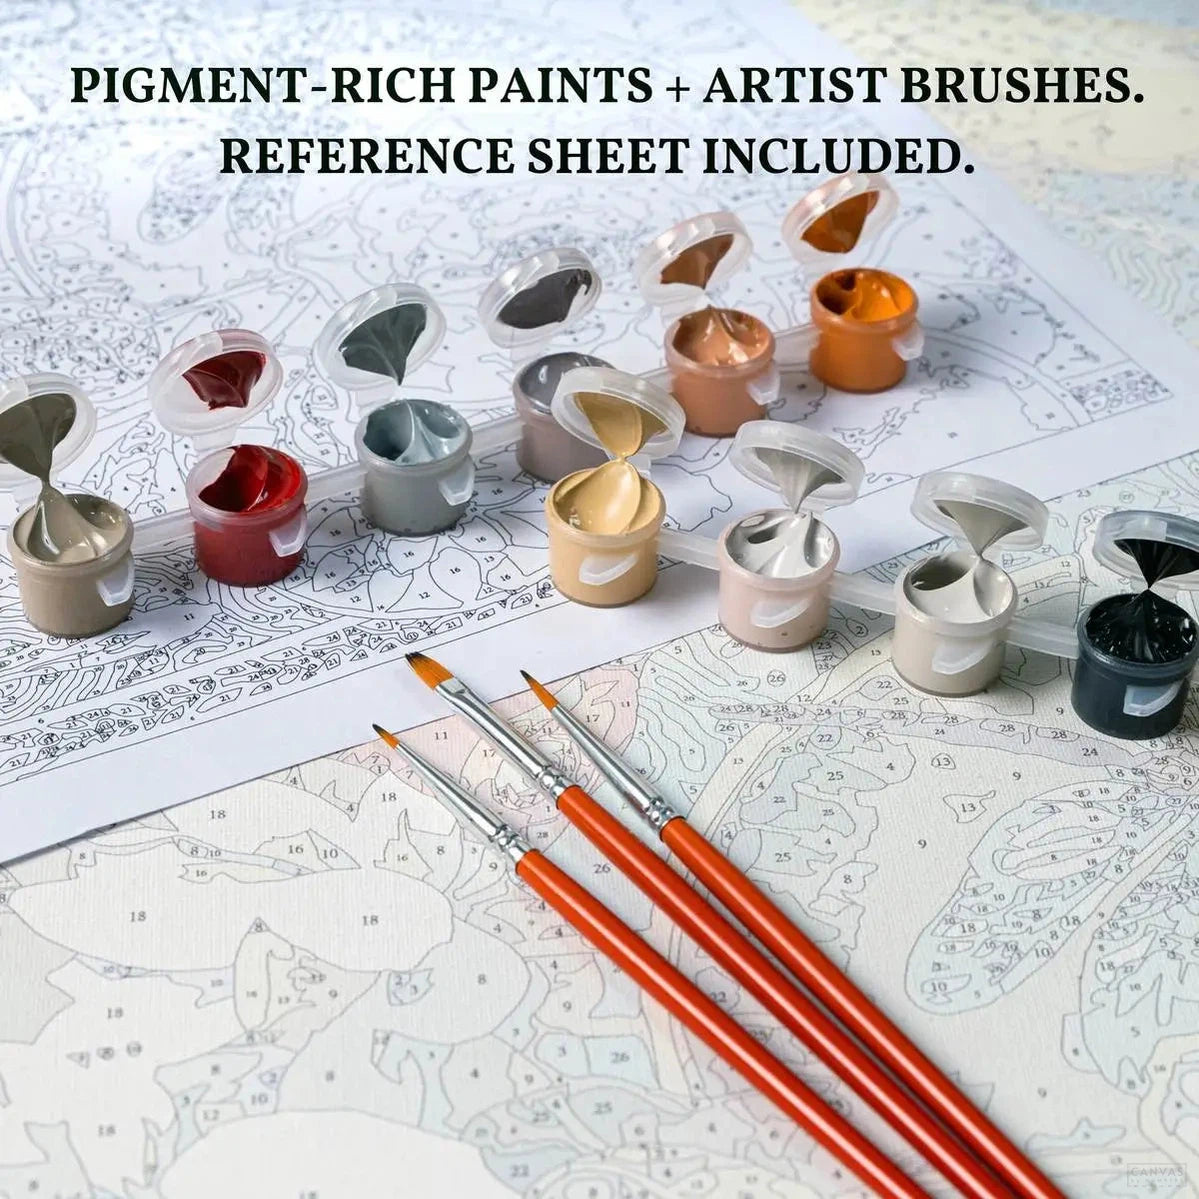 Magic Town - Paint by Numbers-Dive into the colorful glasswork-like art with this paint by numbers kit by Natalia Zagorii. Ideal for beginners and experienced painters alike!-Canvas by Numbers